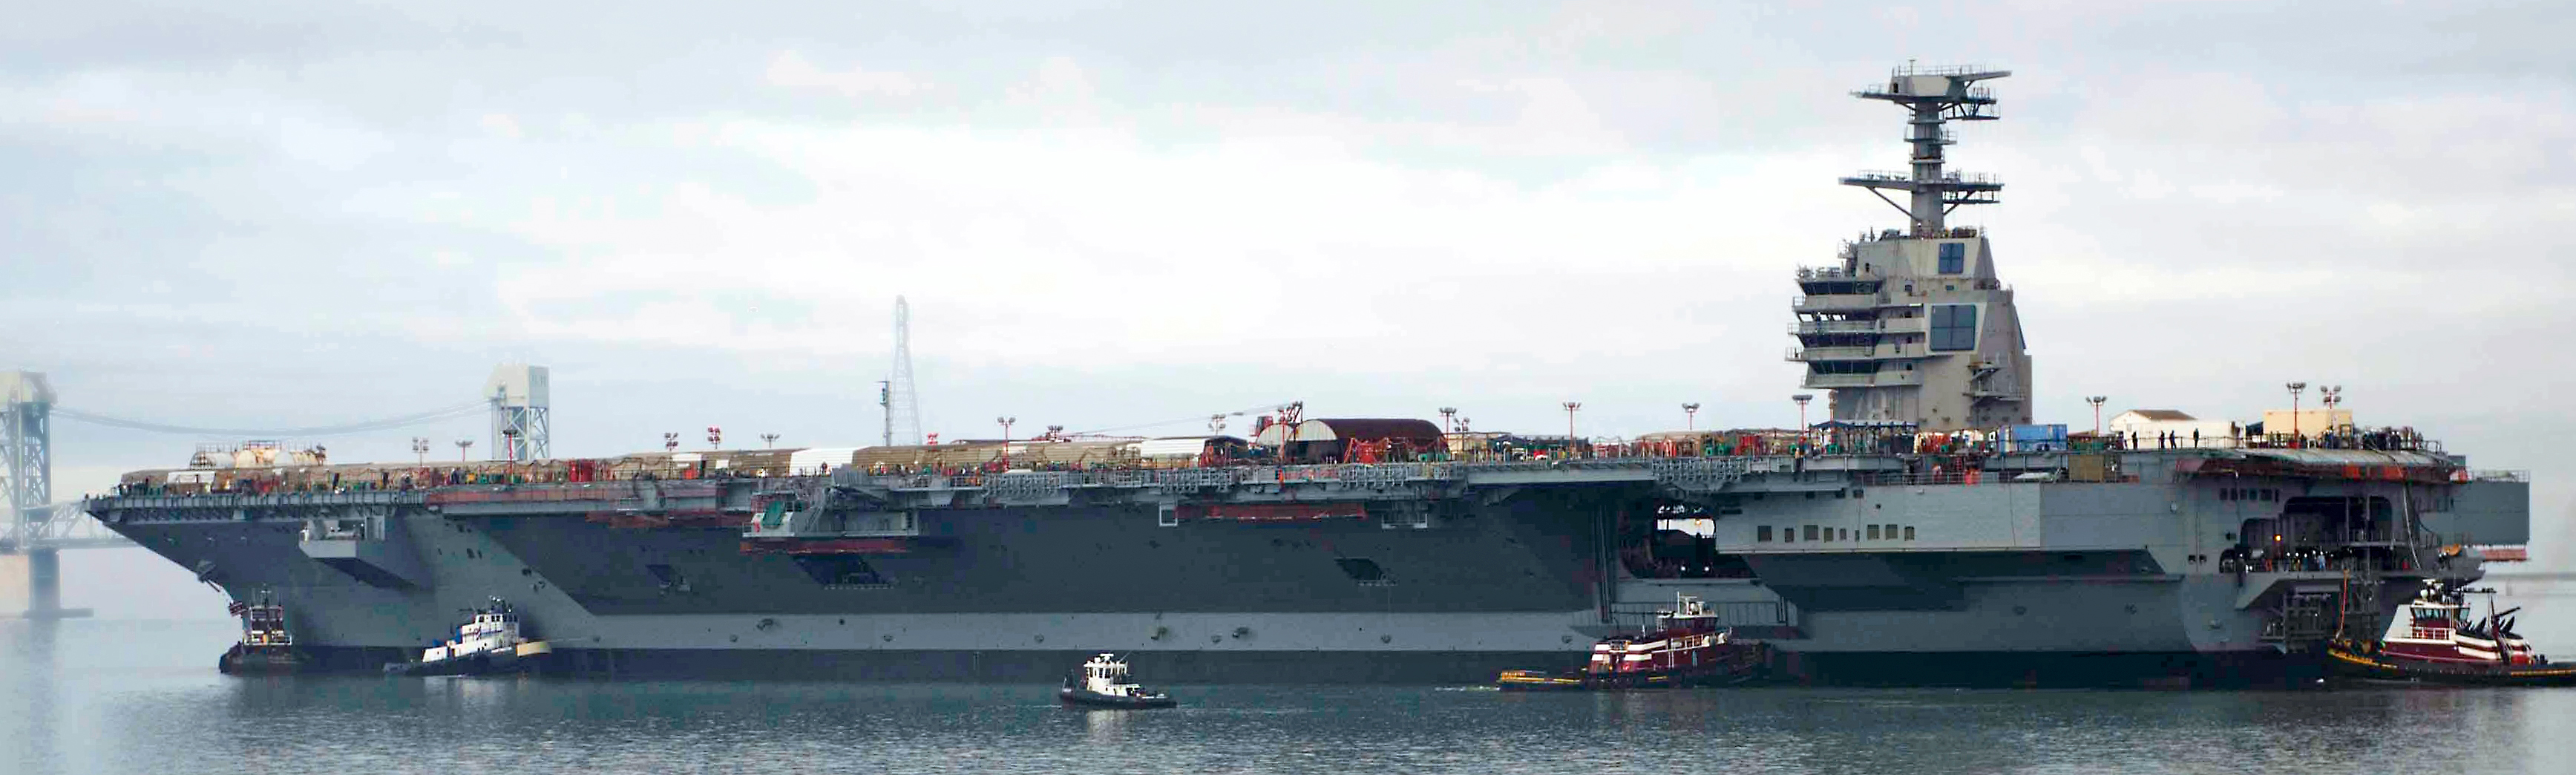 USS_Gerald_R._Ford_%28CVN-78%29_on_the_James_River_in_2013.JPG